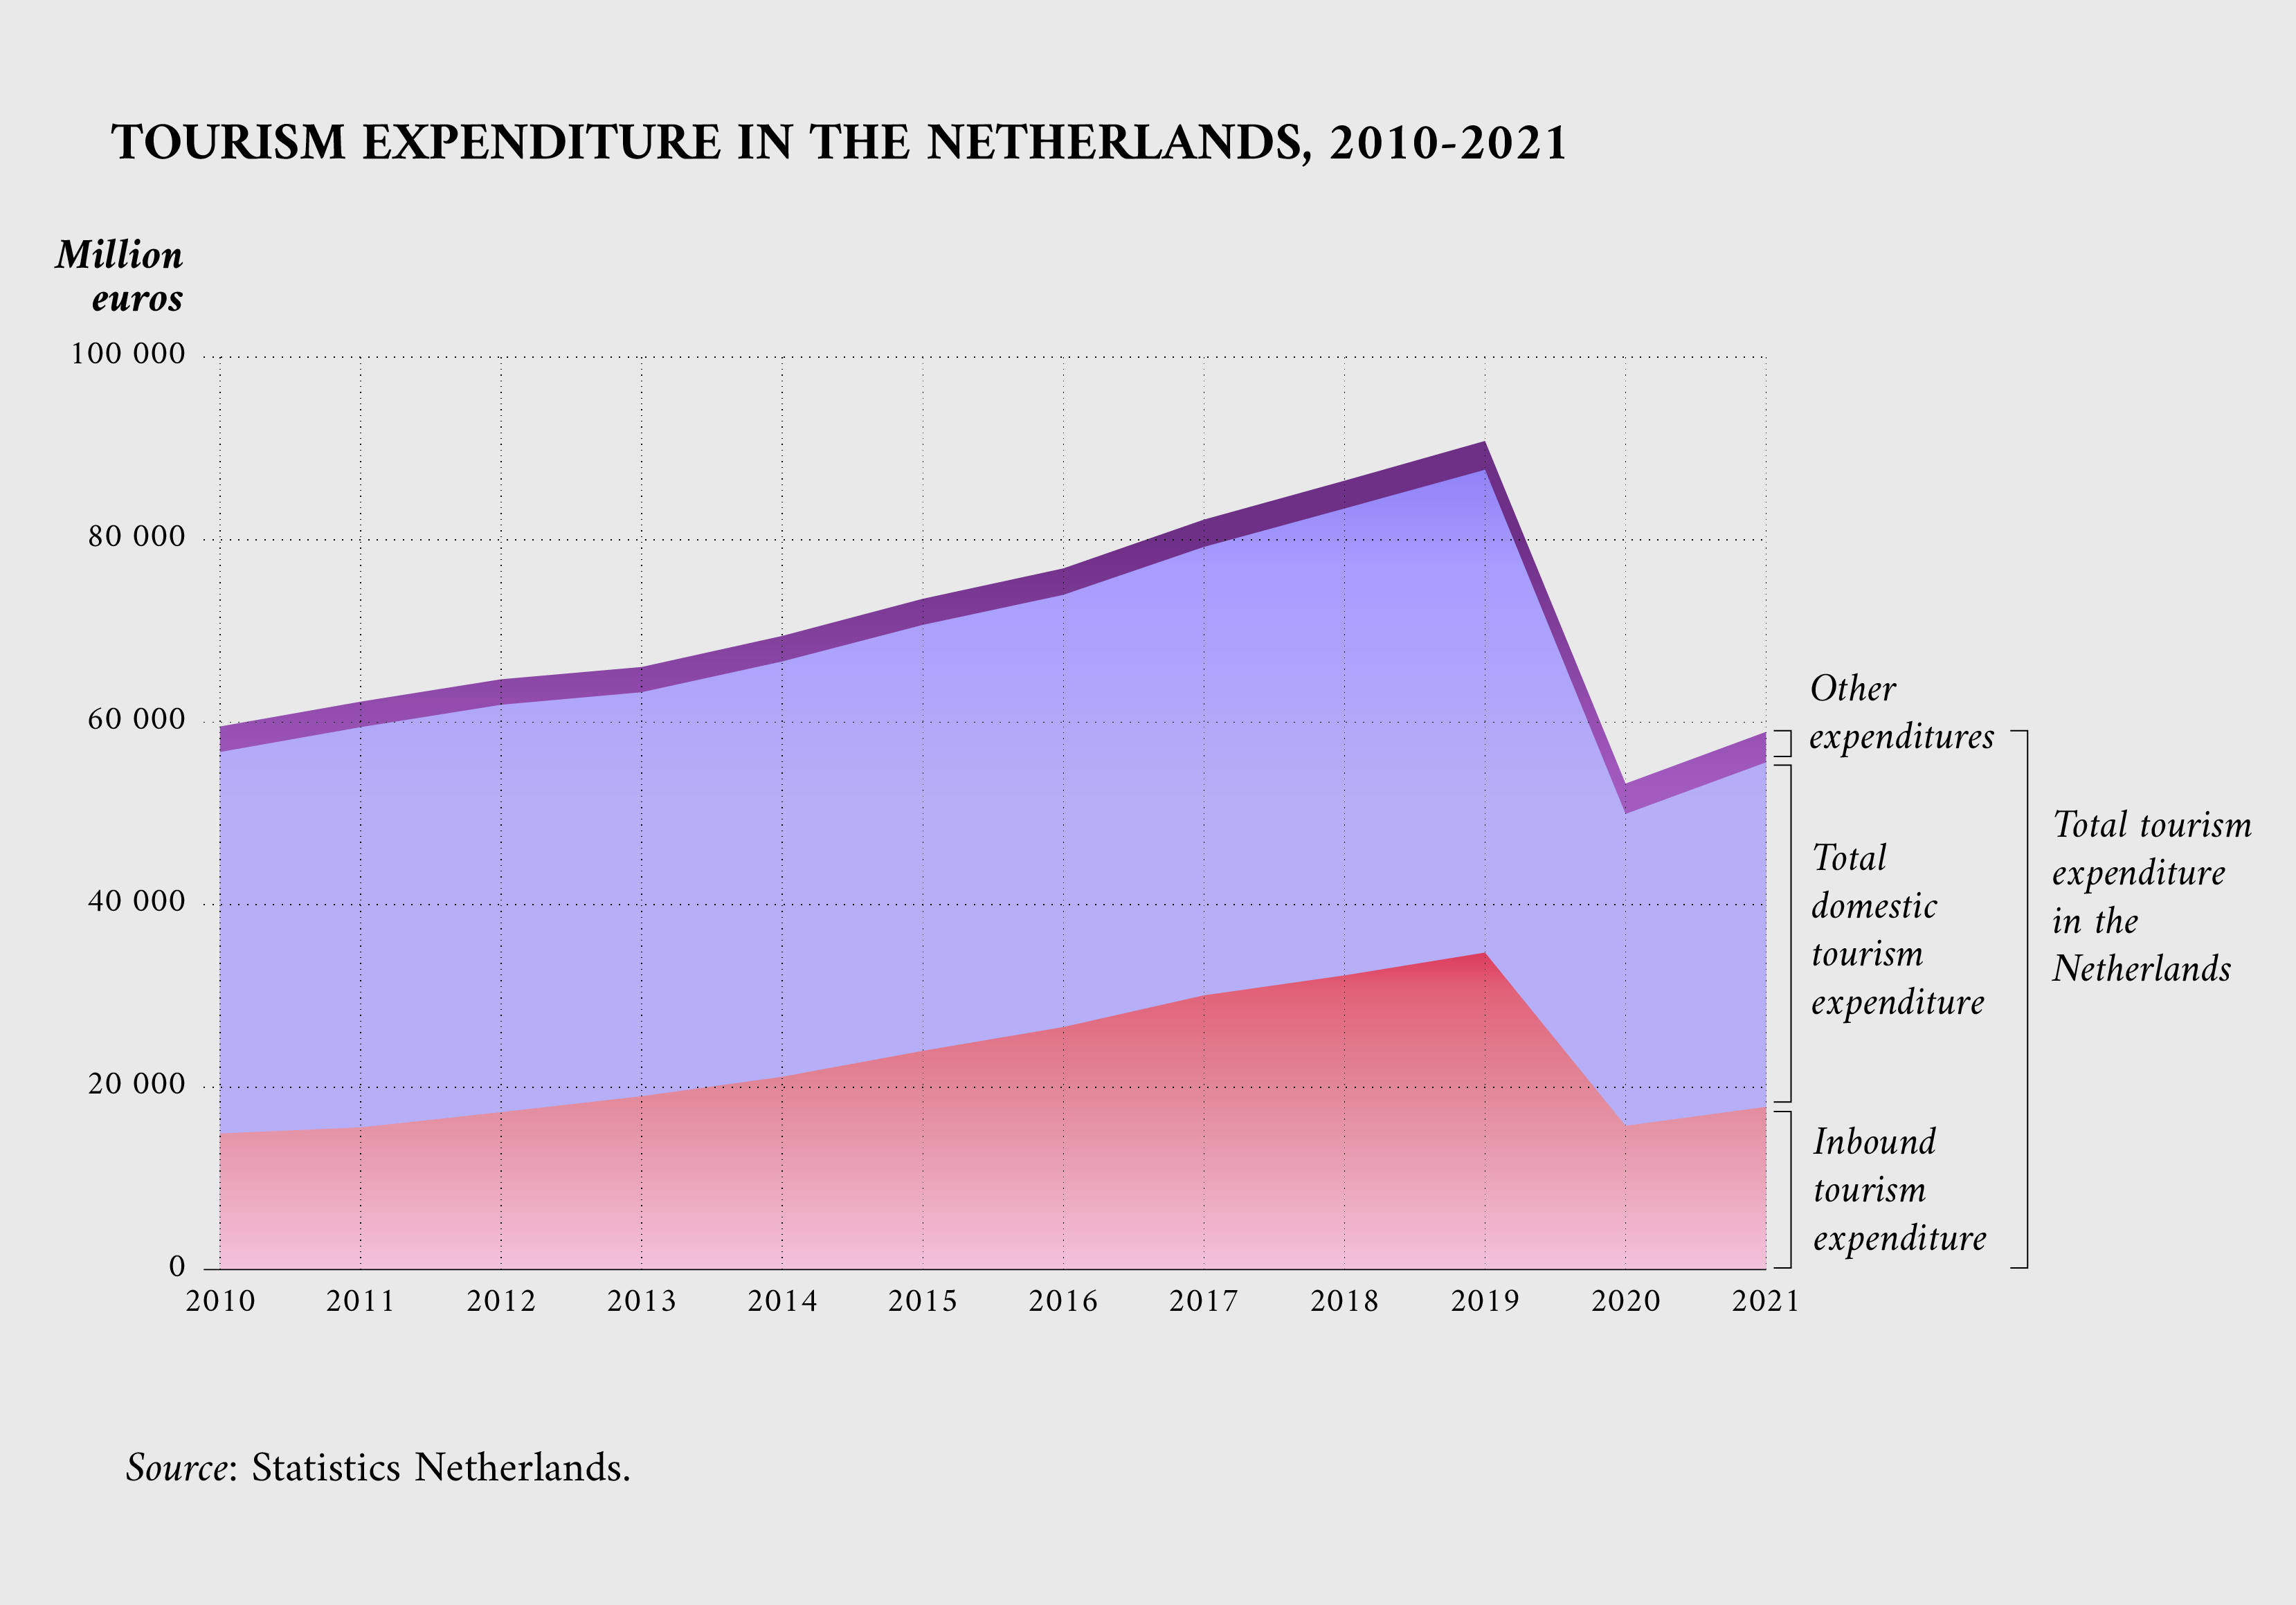 Tourism expenditure in the Netherlands